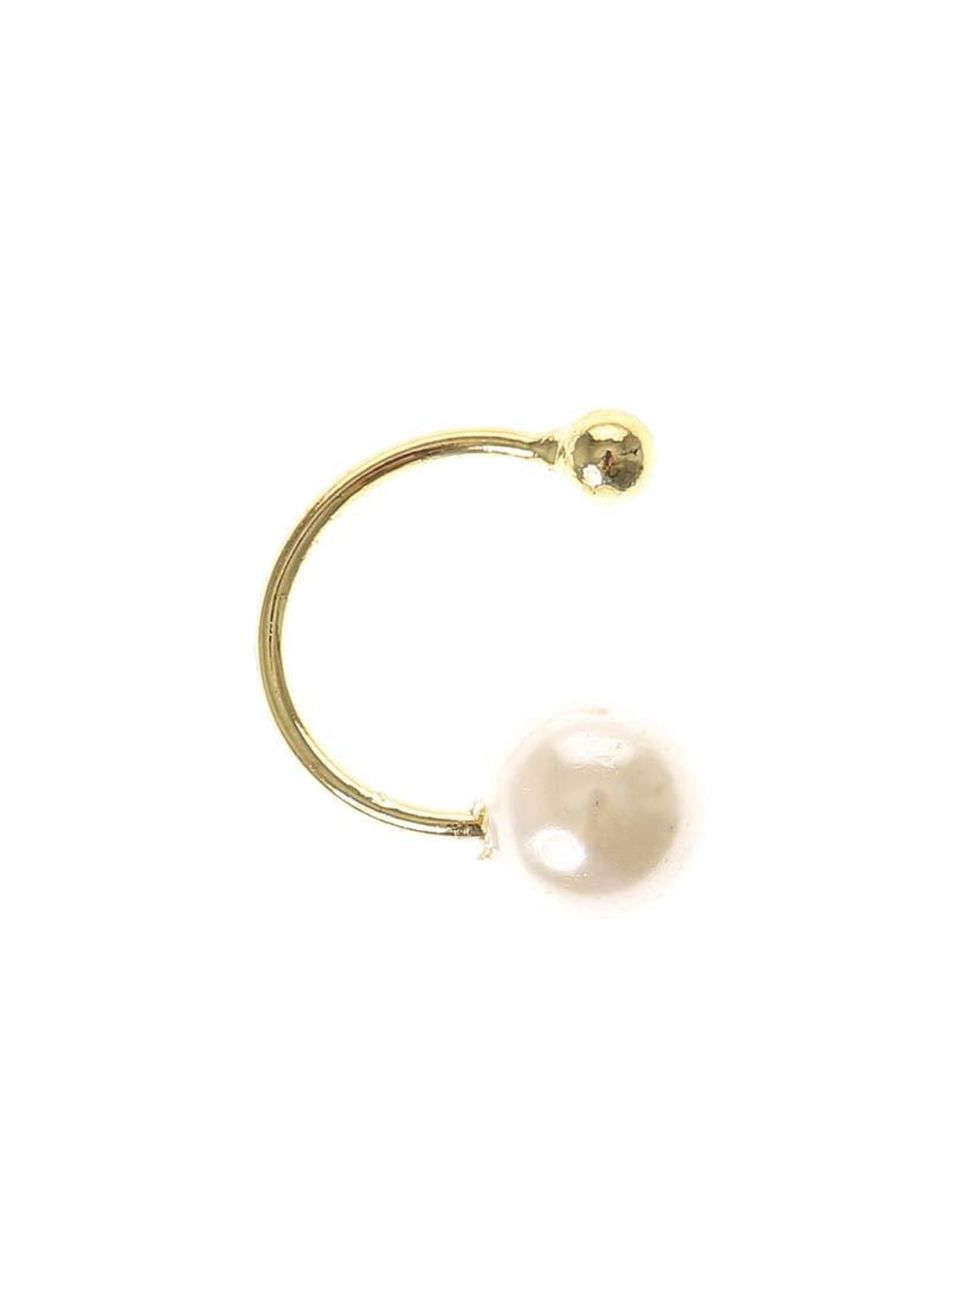 <p>Adorn your ears (well, just the one).</p>

<p><a href="http://www.claires.co.uk/mini-pearl-ear-cuff/shop/fcp-product/36946" target="_blank">Claire's</a> ear cuff, £4.50</p>